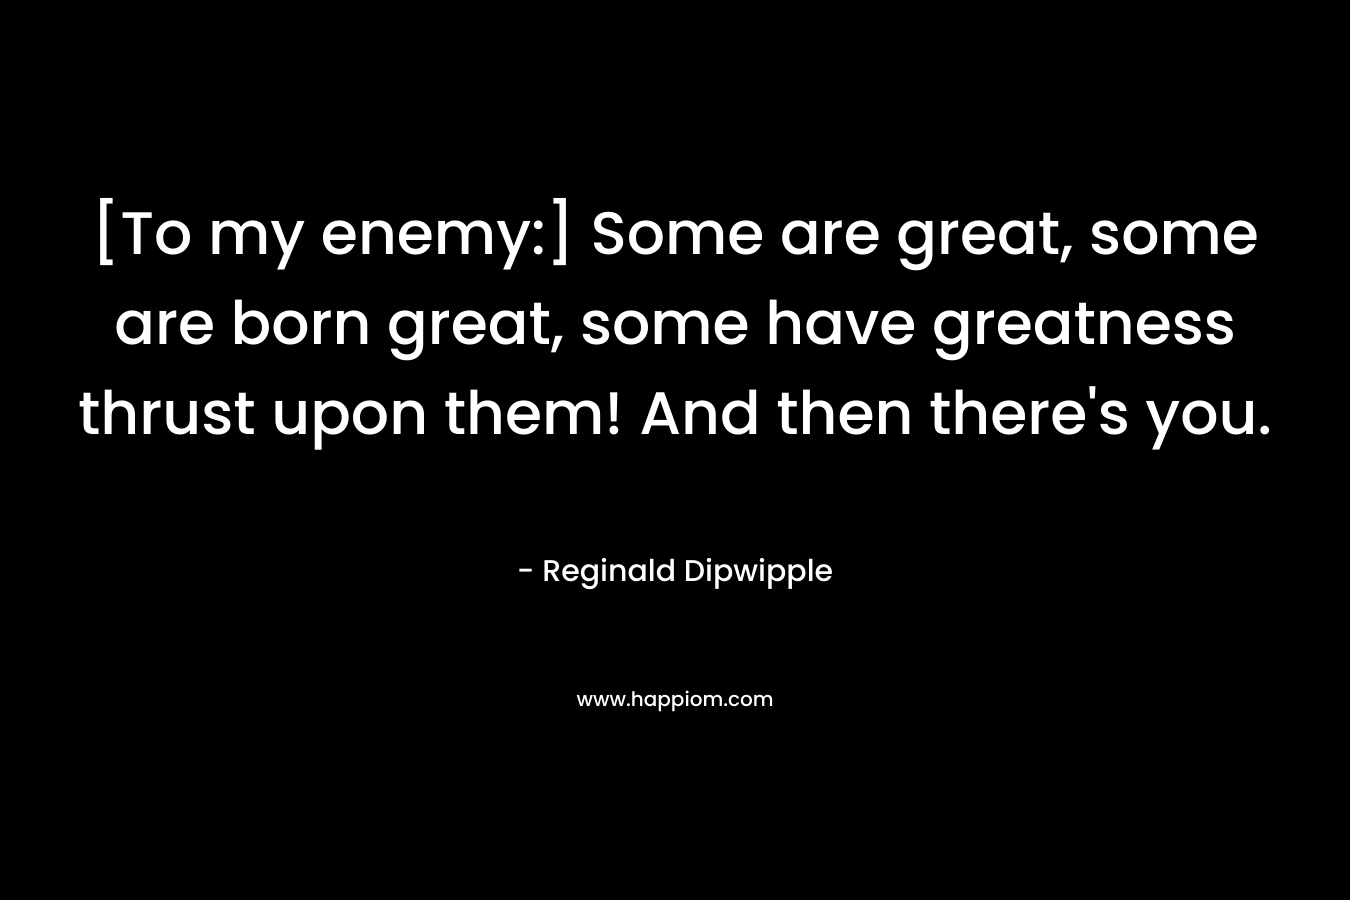 [To my enemy:] Some are great, some are born great, some have greatness thrust upon them! And then there’s you. – Reginald Dipwipple